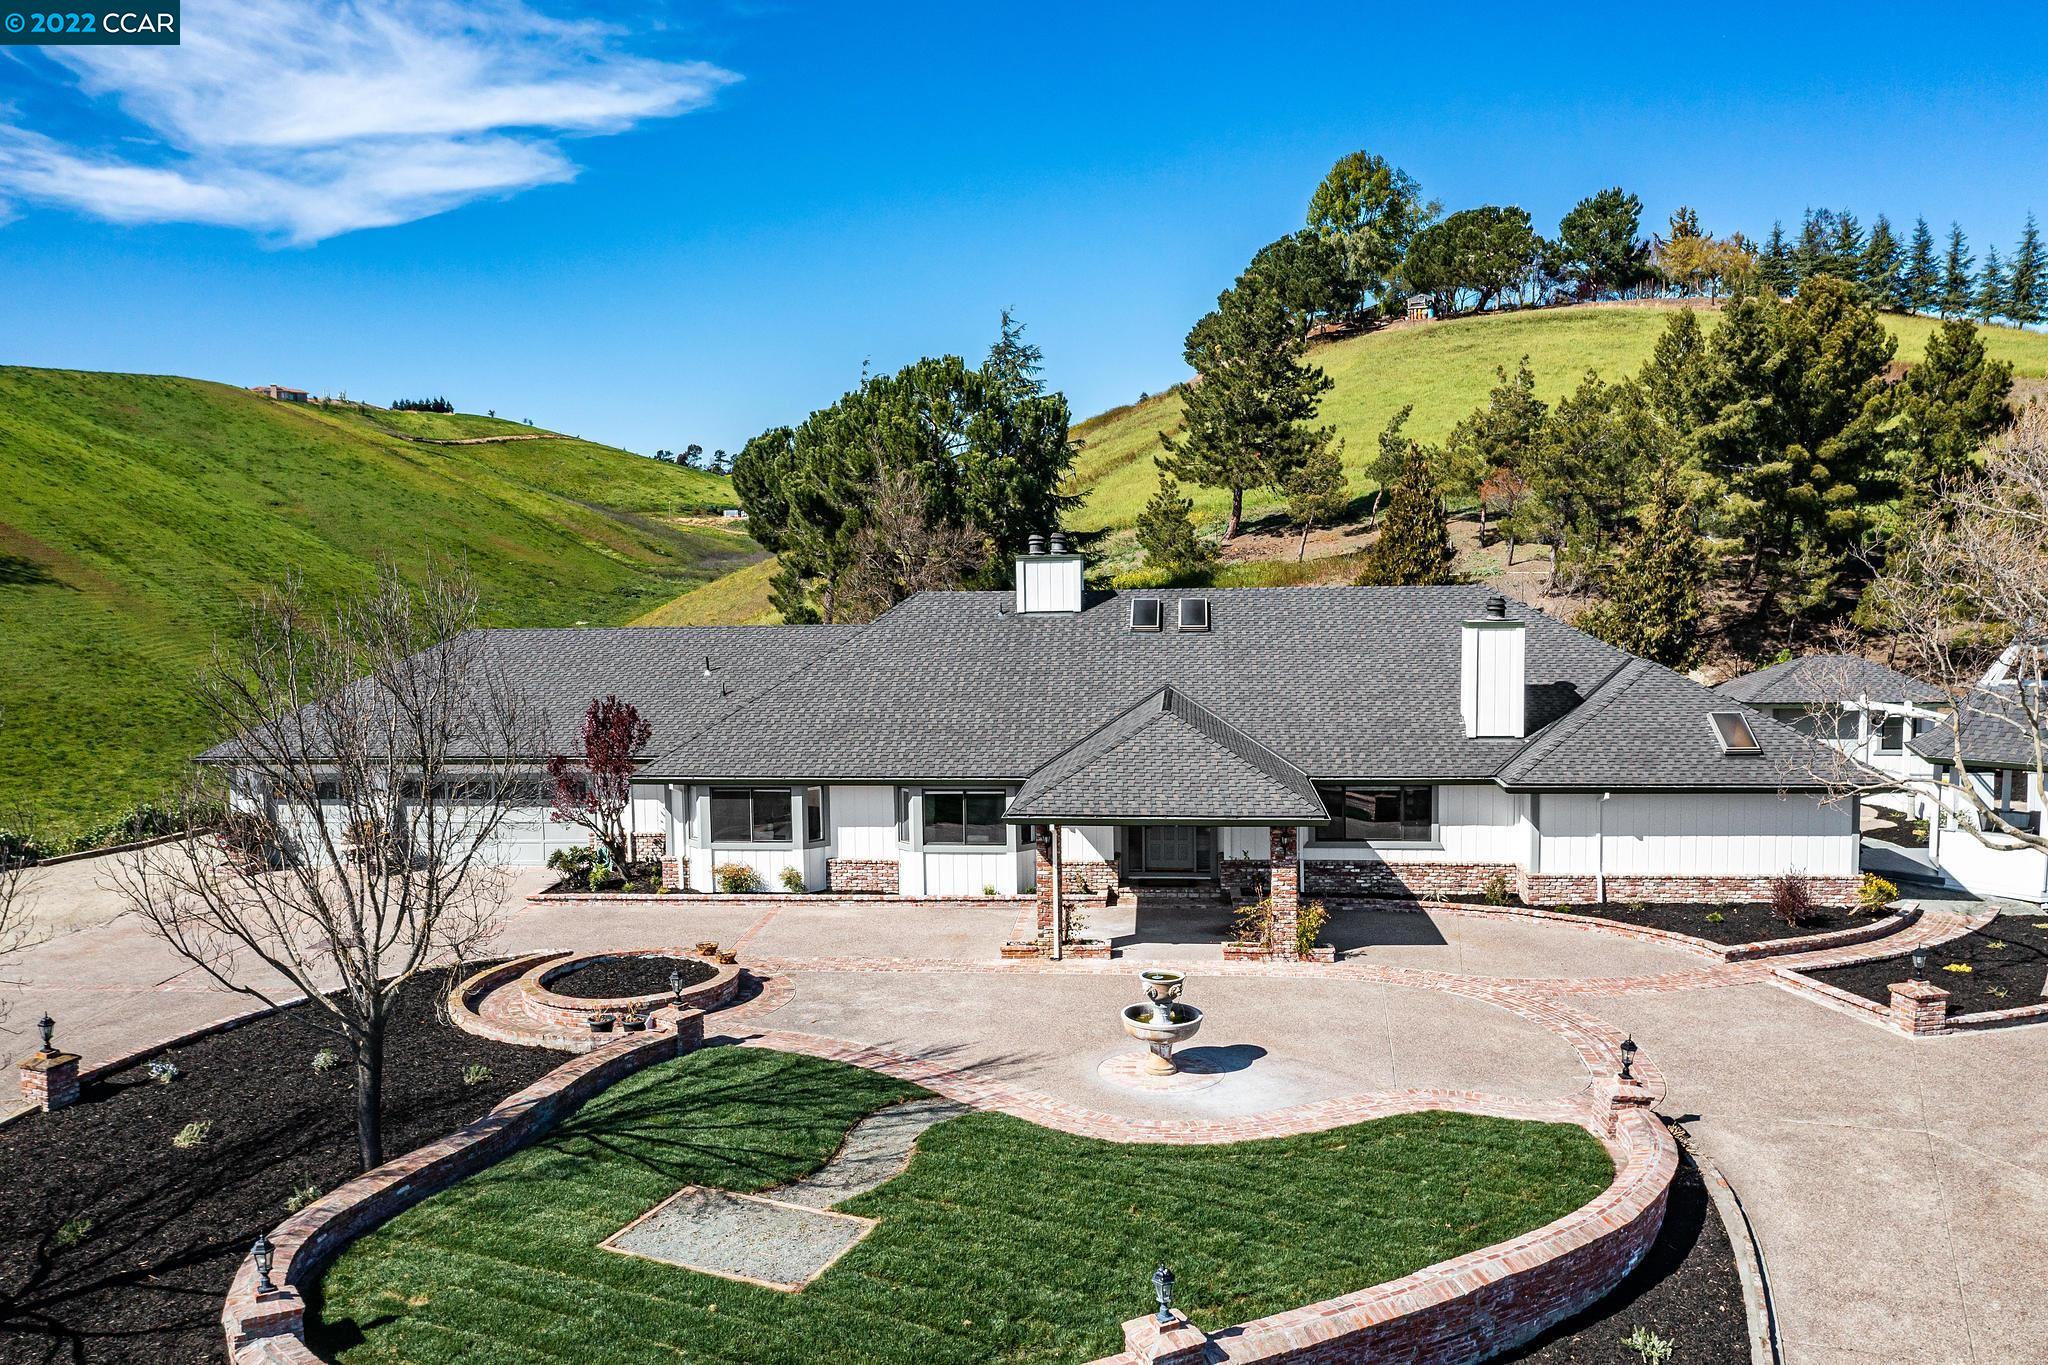 Photo of 1520 Lawrence Rd in Danville, CA